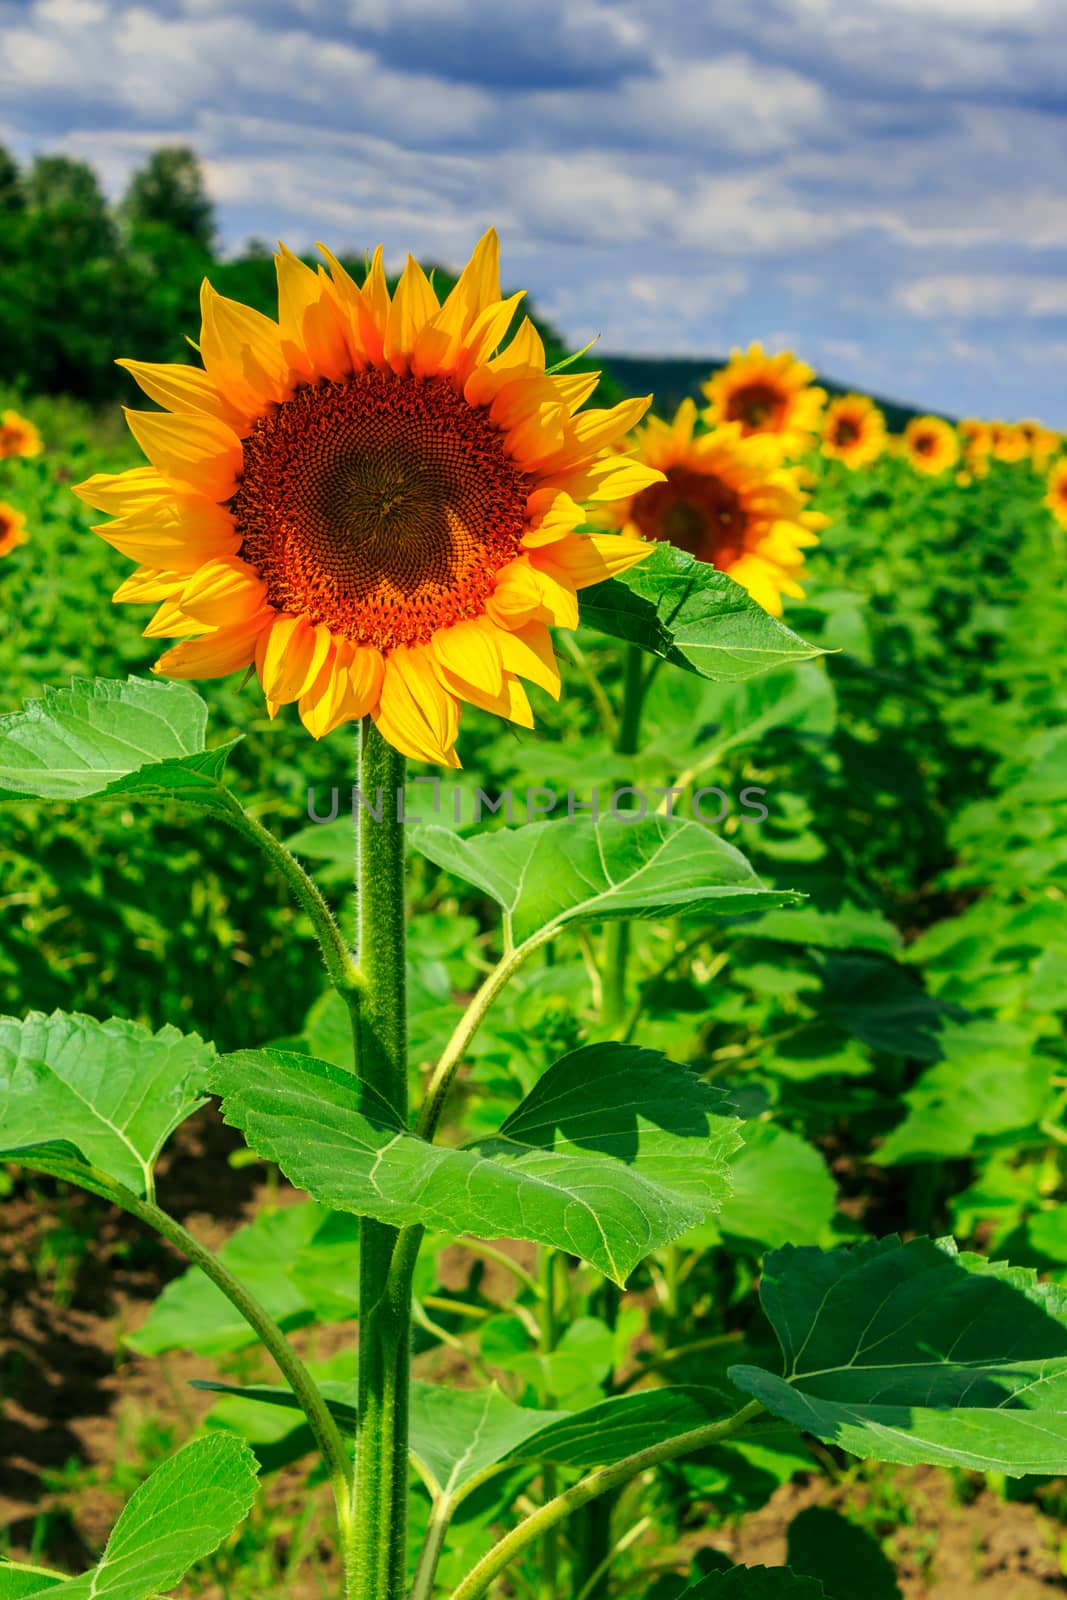 rowsof young sunflowers near the hill under a blue sky vertical